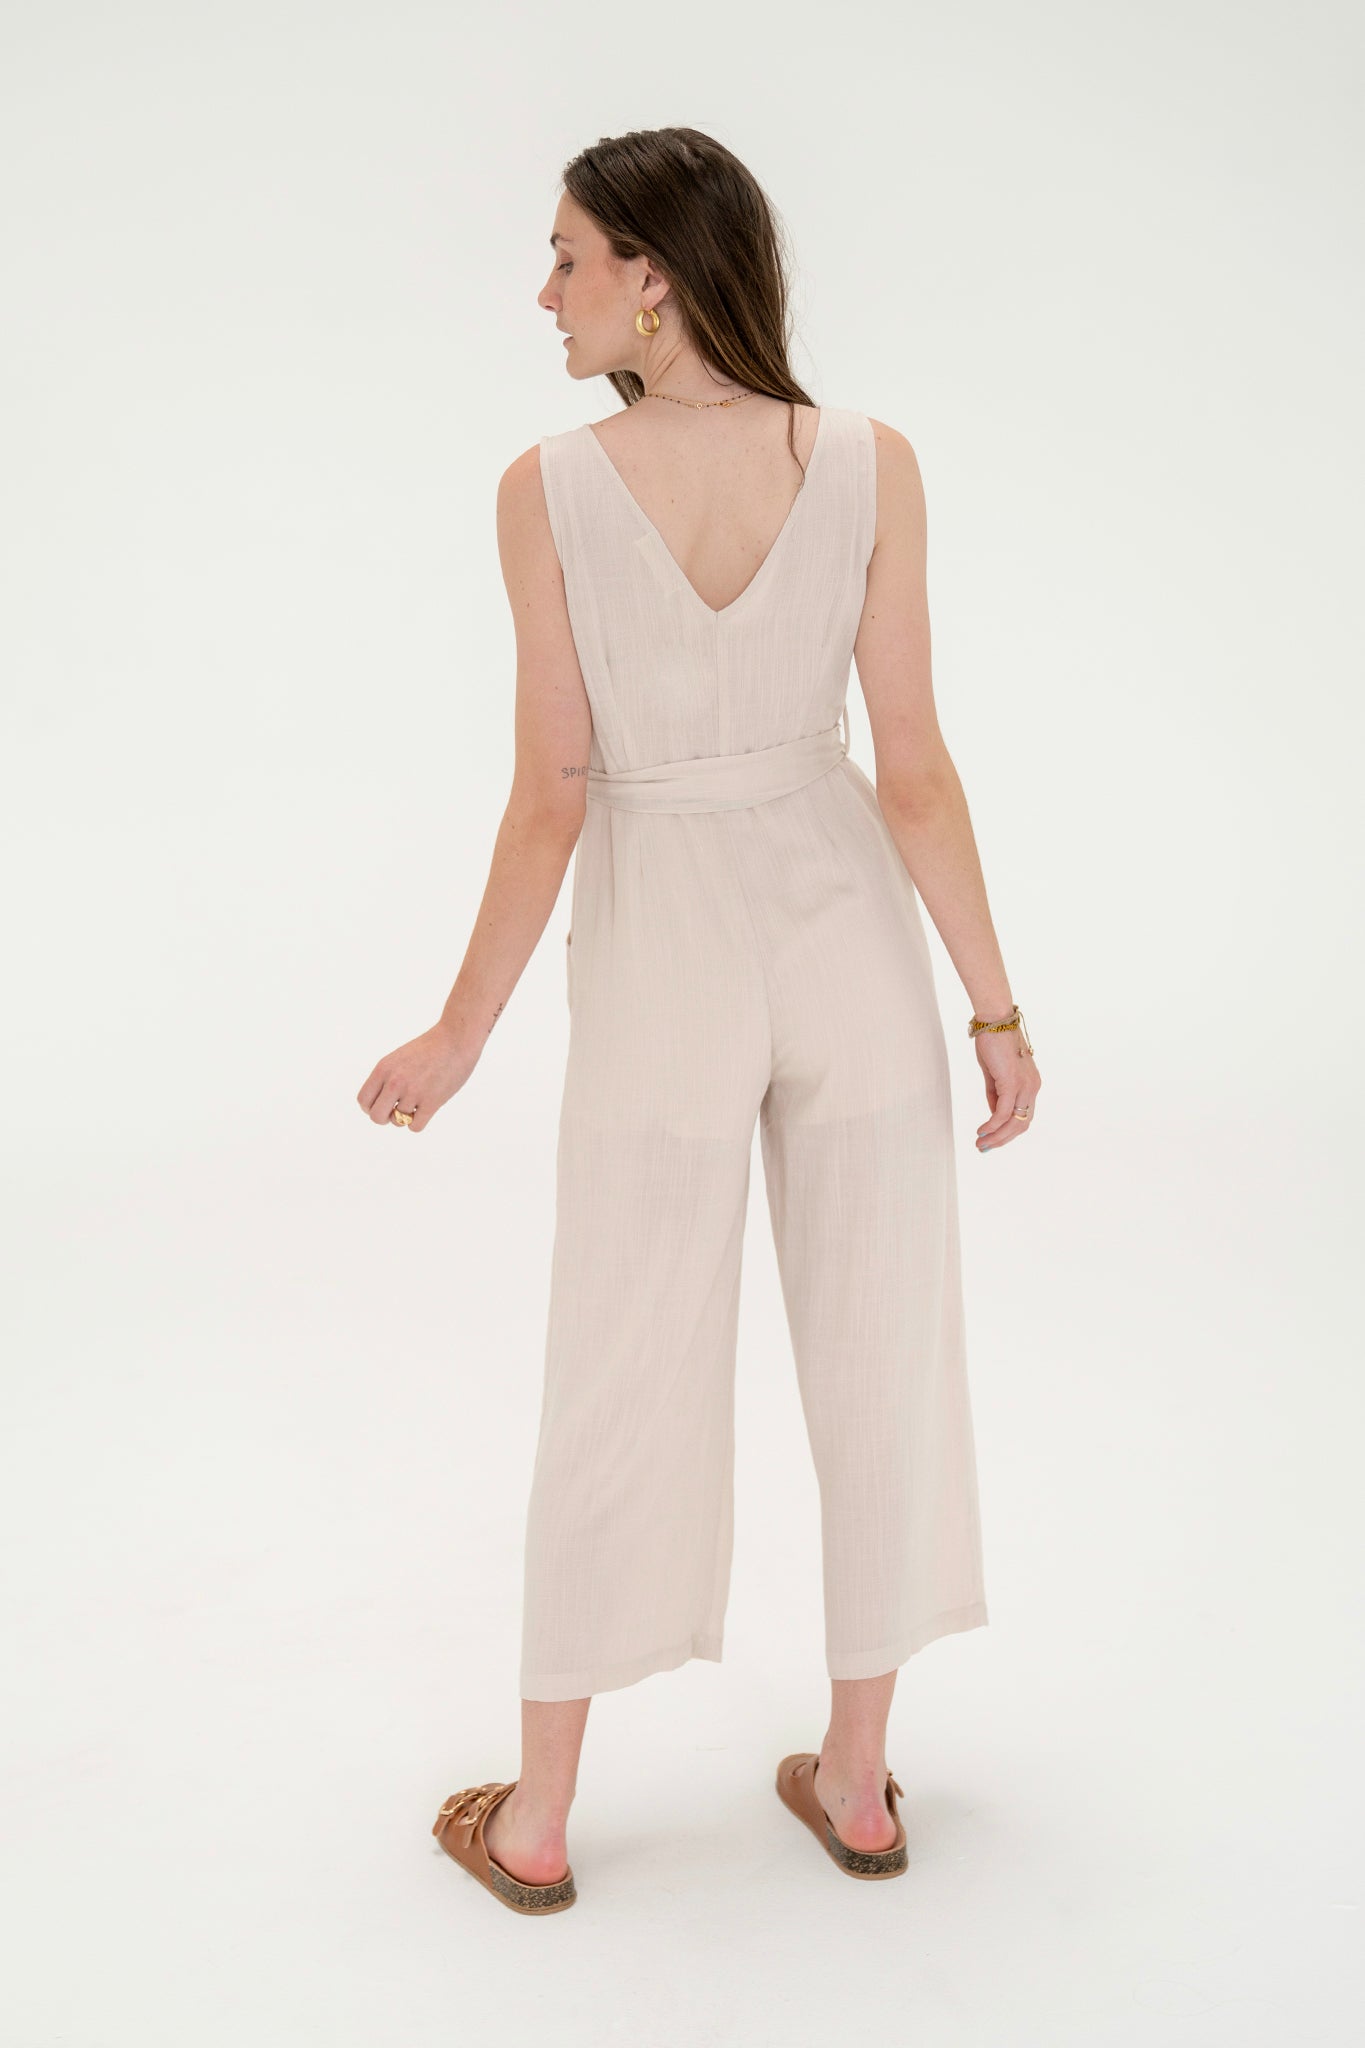 View 4 of Medanos Jumpsuit, a Jumpsuits from Larrea Cove. Detail: .